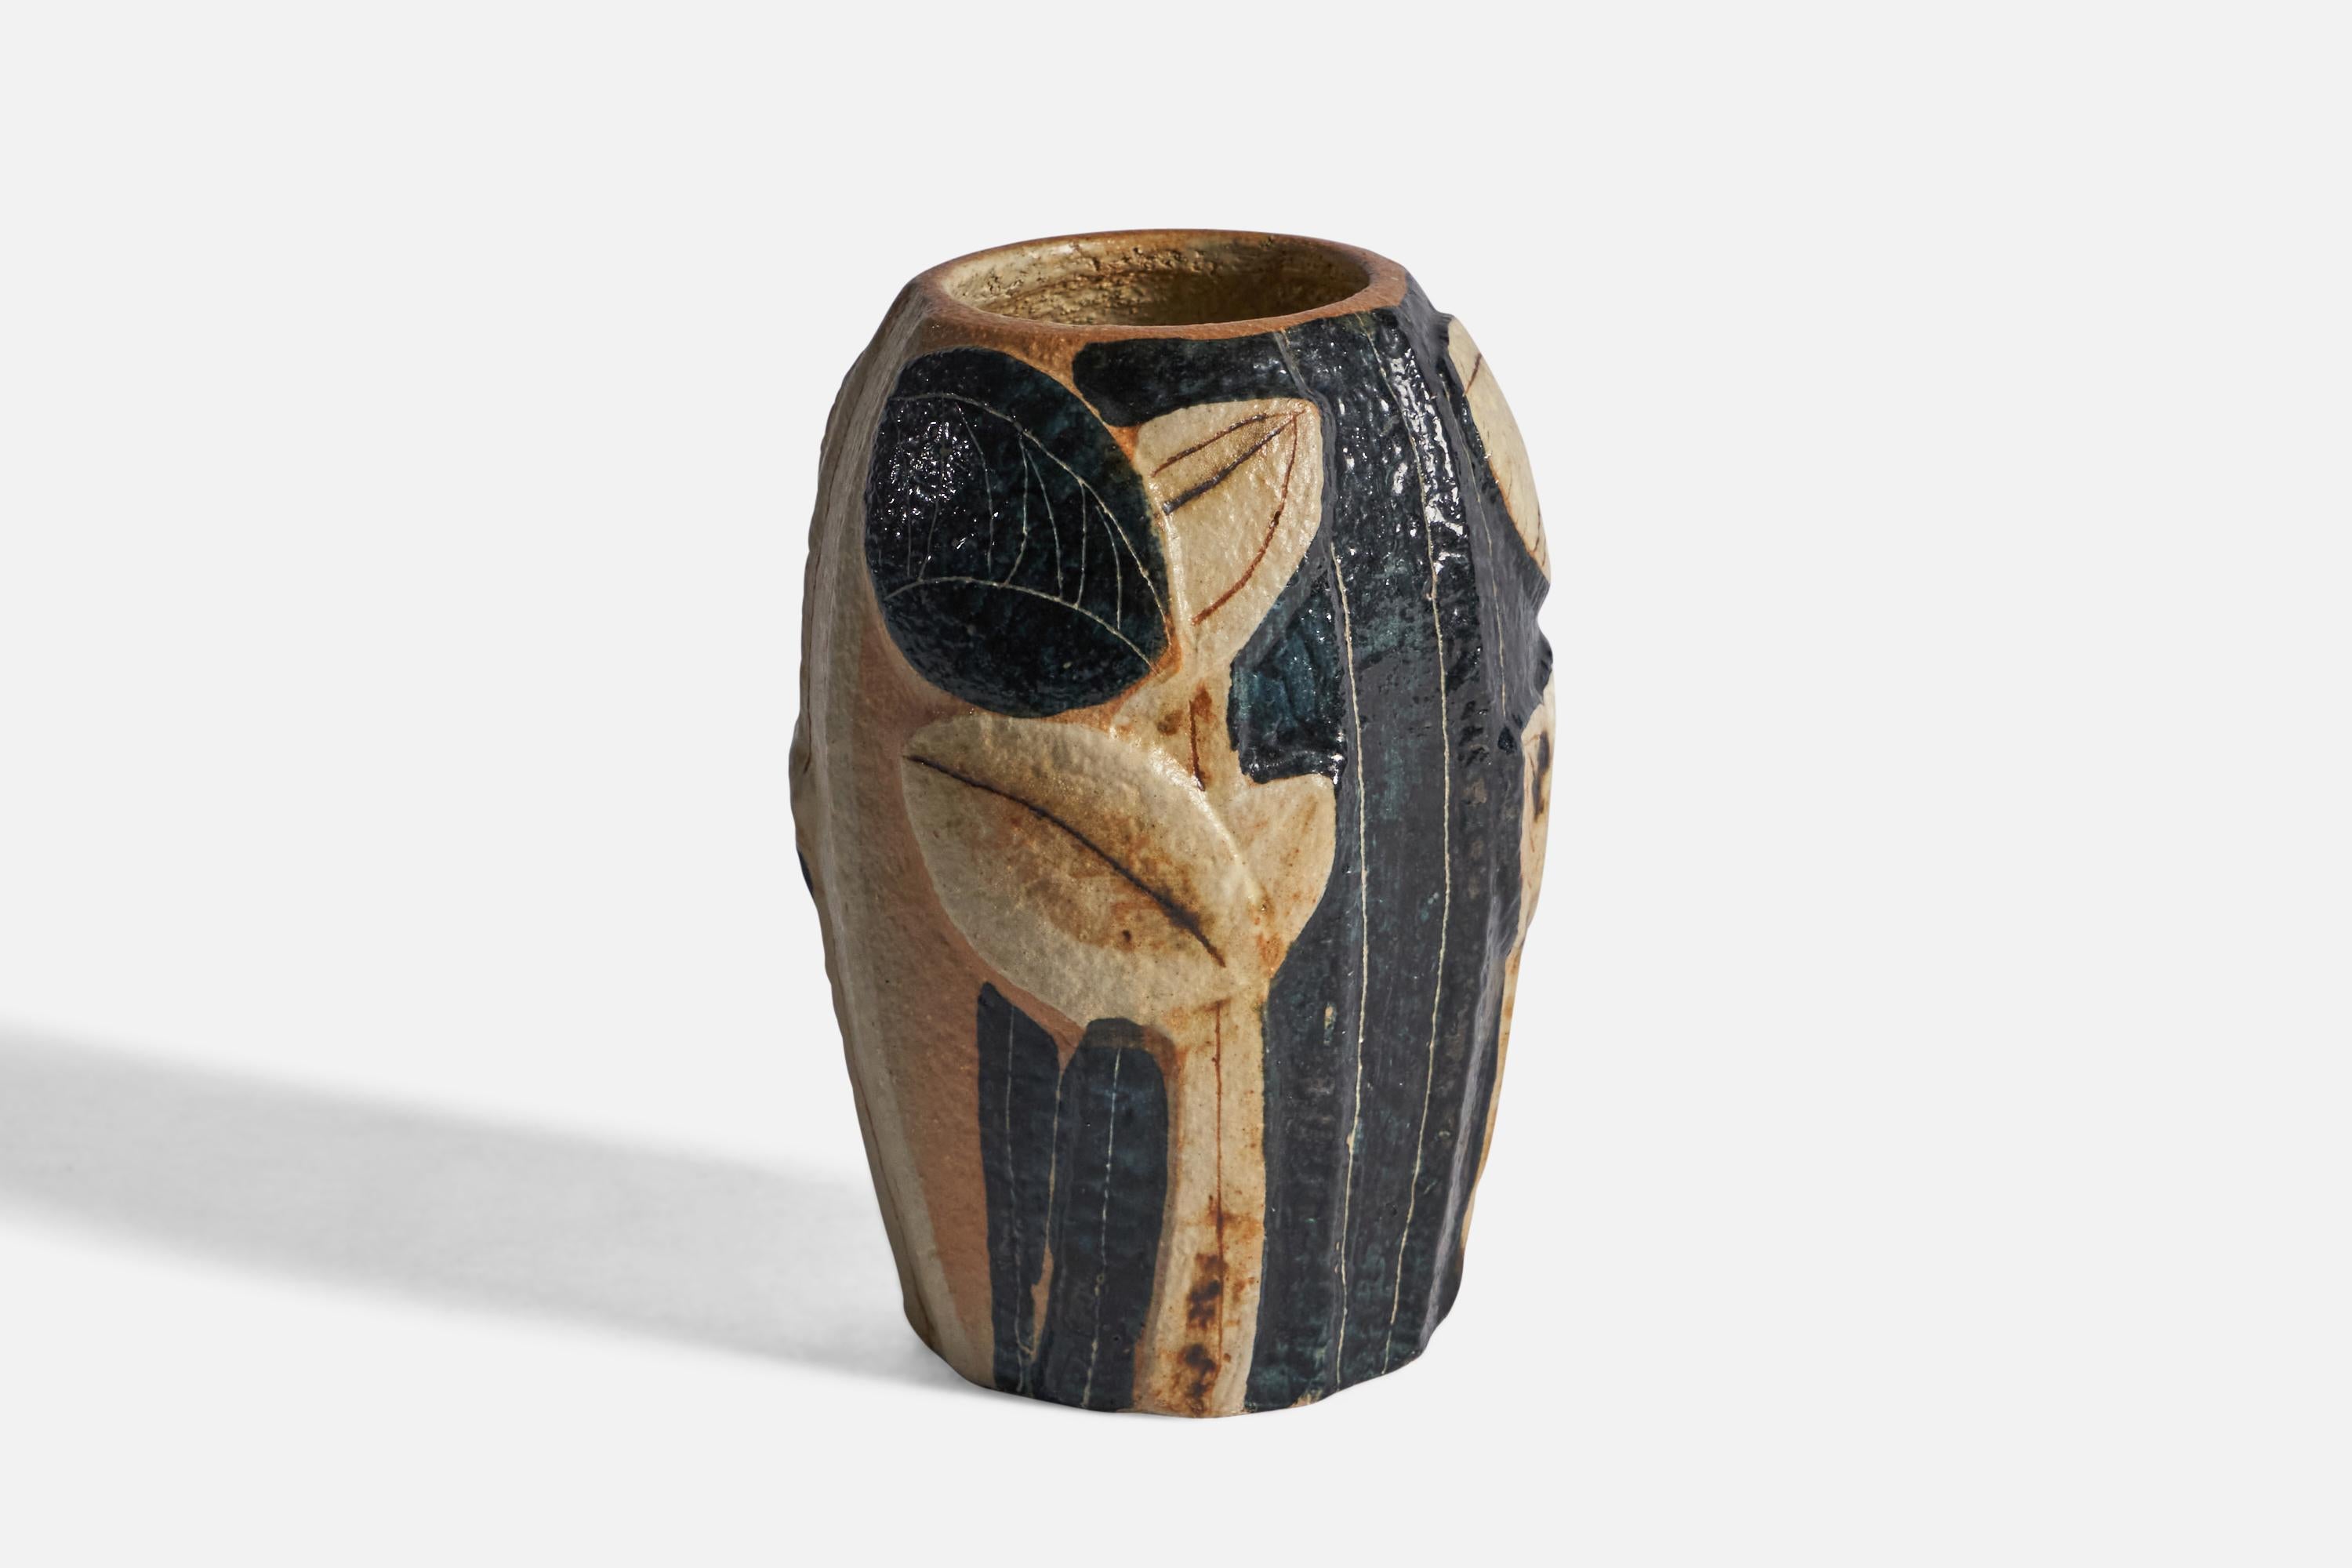 A beige and black-glazed stoneware vase with relief decoration, designed by Noomi Backhausen and produced by Søholm, Bornholm, Denmark, 1960s.